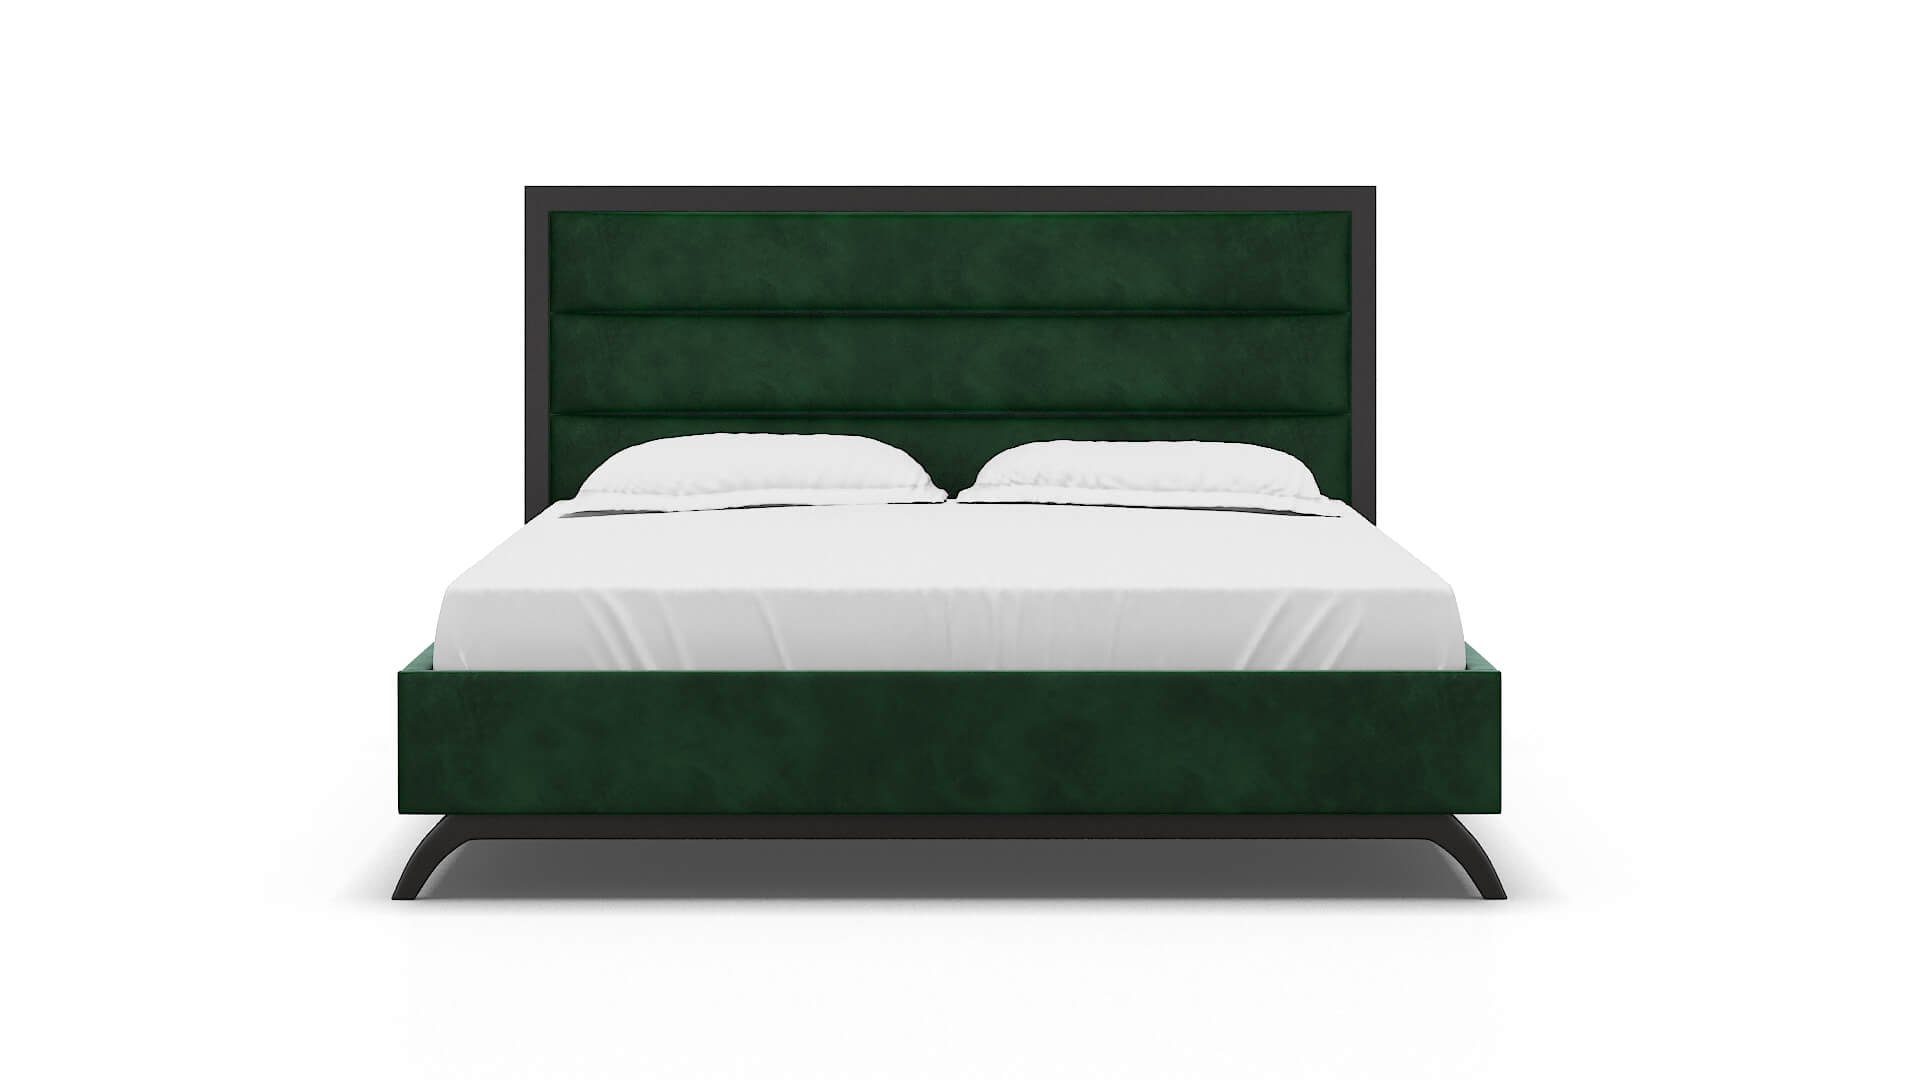 Meliano Royale Evergreen Bed King espresso legs 1